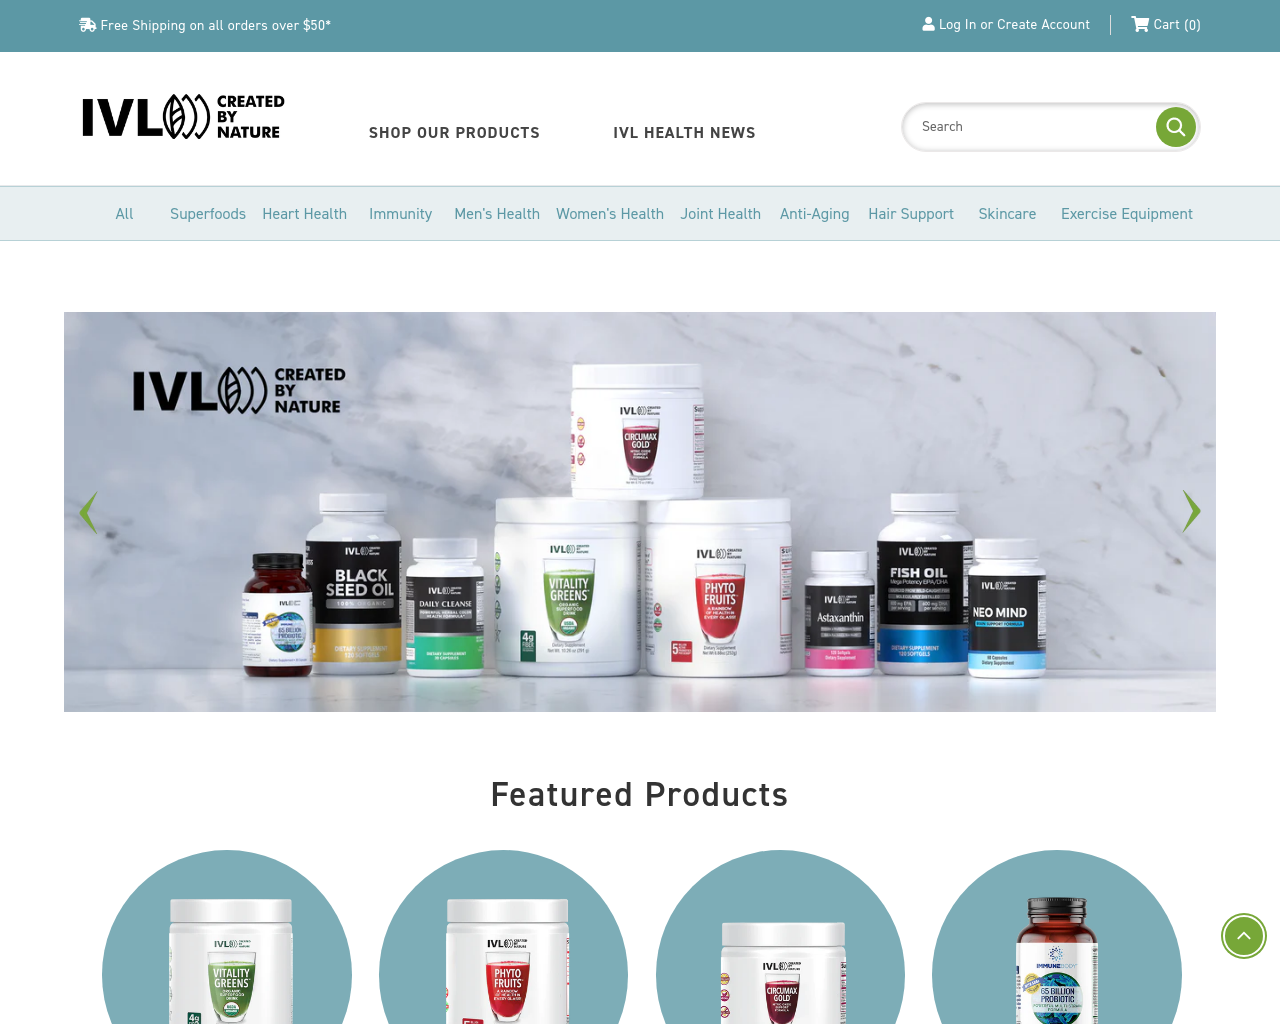 ivlproducts.com